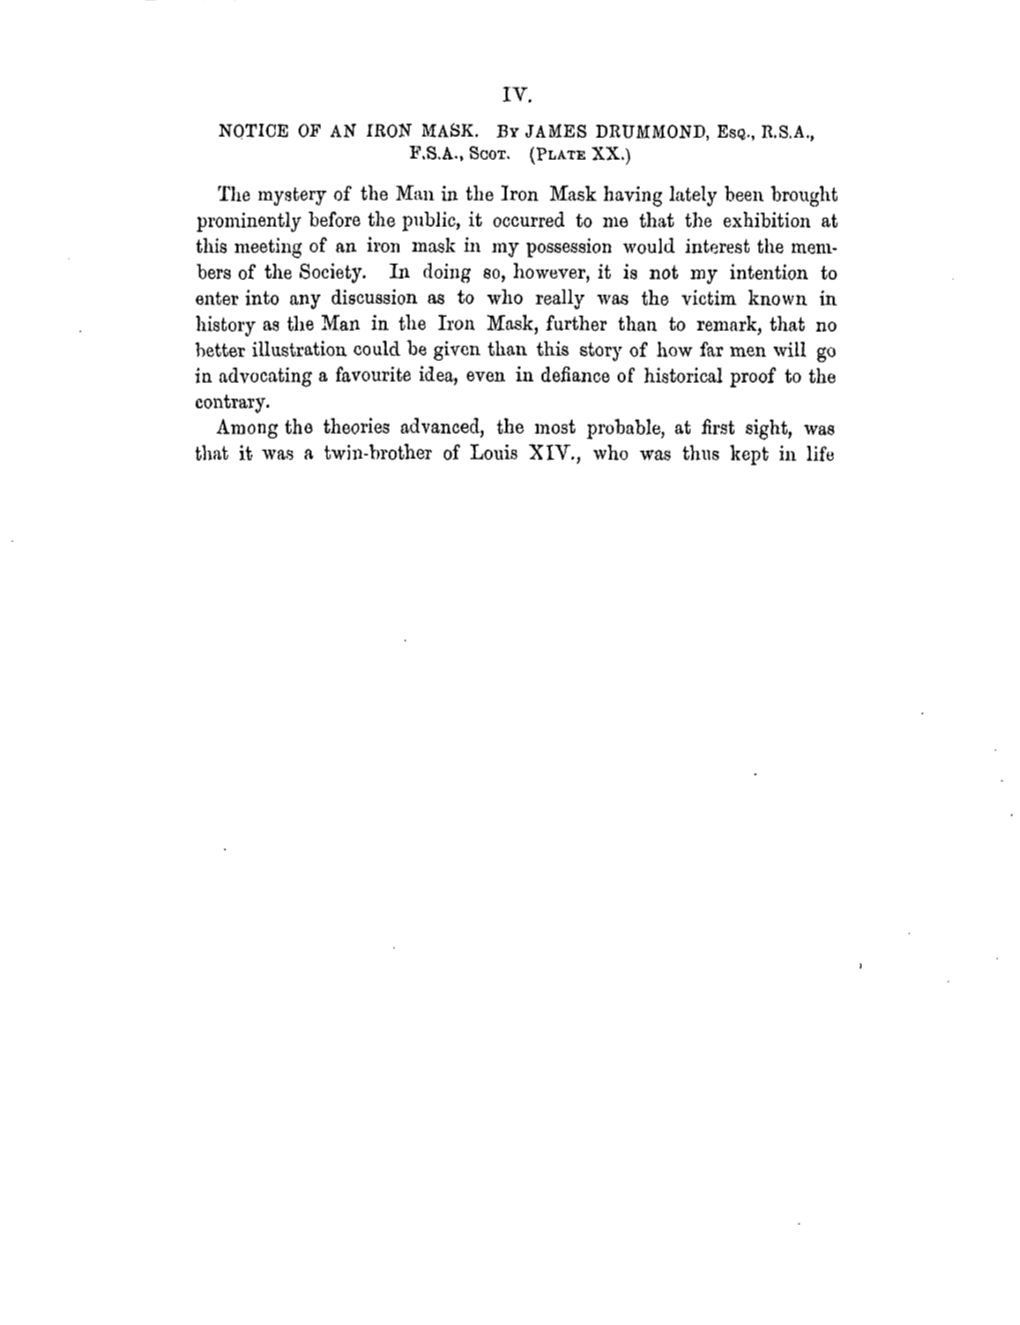 Iv. Notice of an Iron Mask. by James Drummond, Esq., U.S.A., F.S.A., Scot